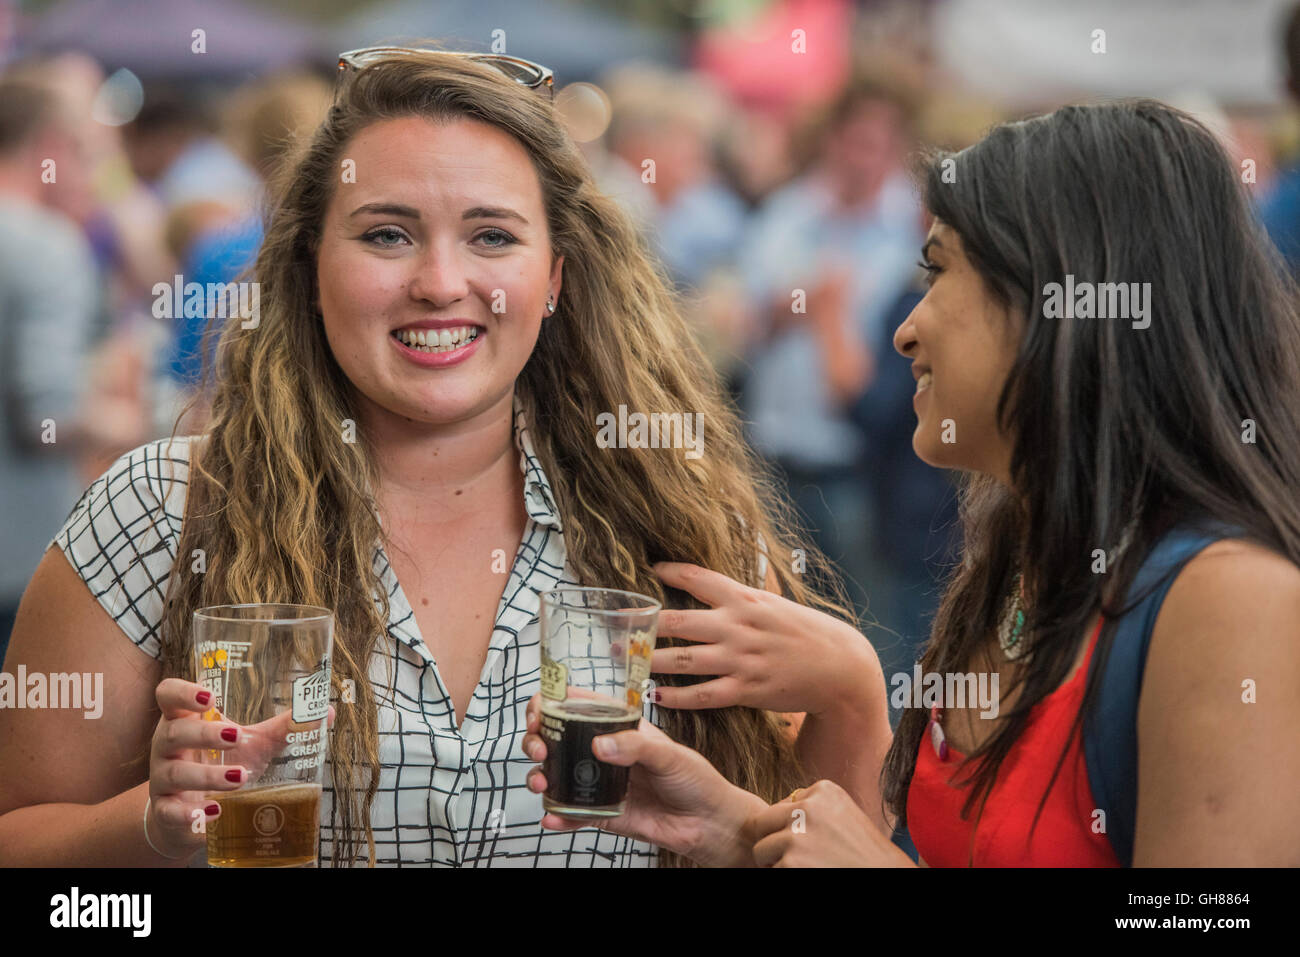 London, UK. 9th August, 2016. Women enjoying pints - The Great British Beer Festival organised by the Campaign for Real Ale (CAMRA) offers visitors over 900 real ales, ciders, perries and international beers at Olympia. Credit:  Guy Bell/Alamy Live News Stock Photo